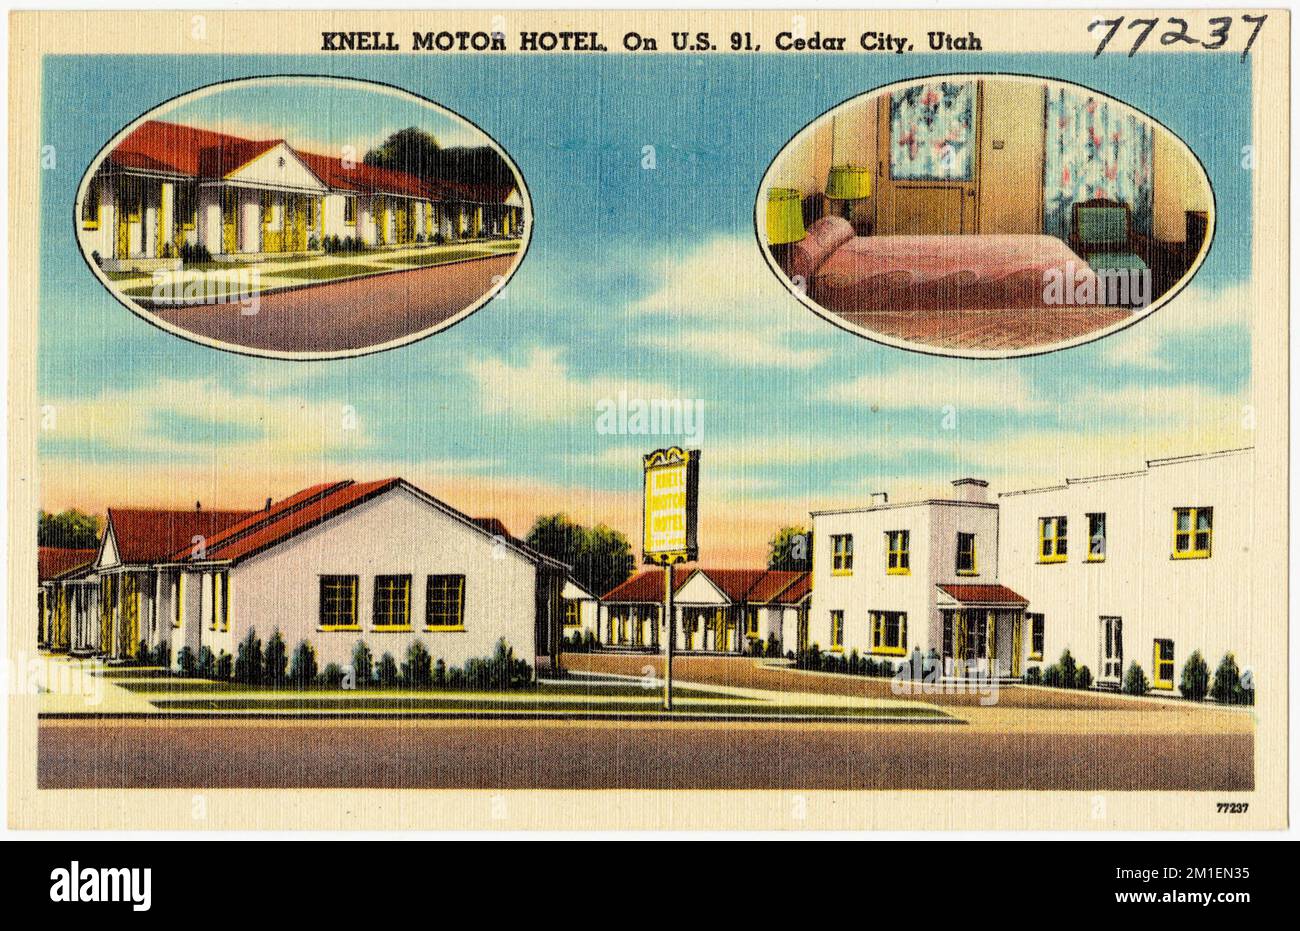 Knell Motor Hotel, on U.S. 91, Cedar City, Utah , Hotels, Tichnor Brothers Collection, postcards of the United States Stock Photo